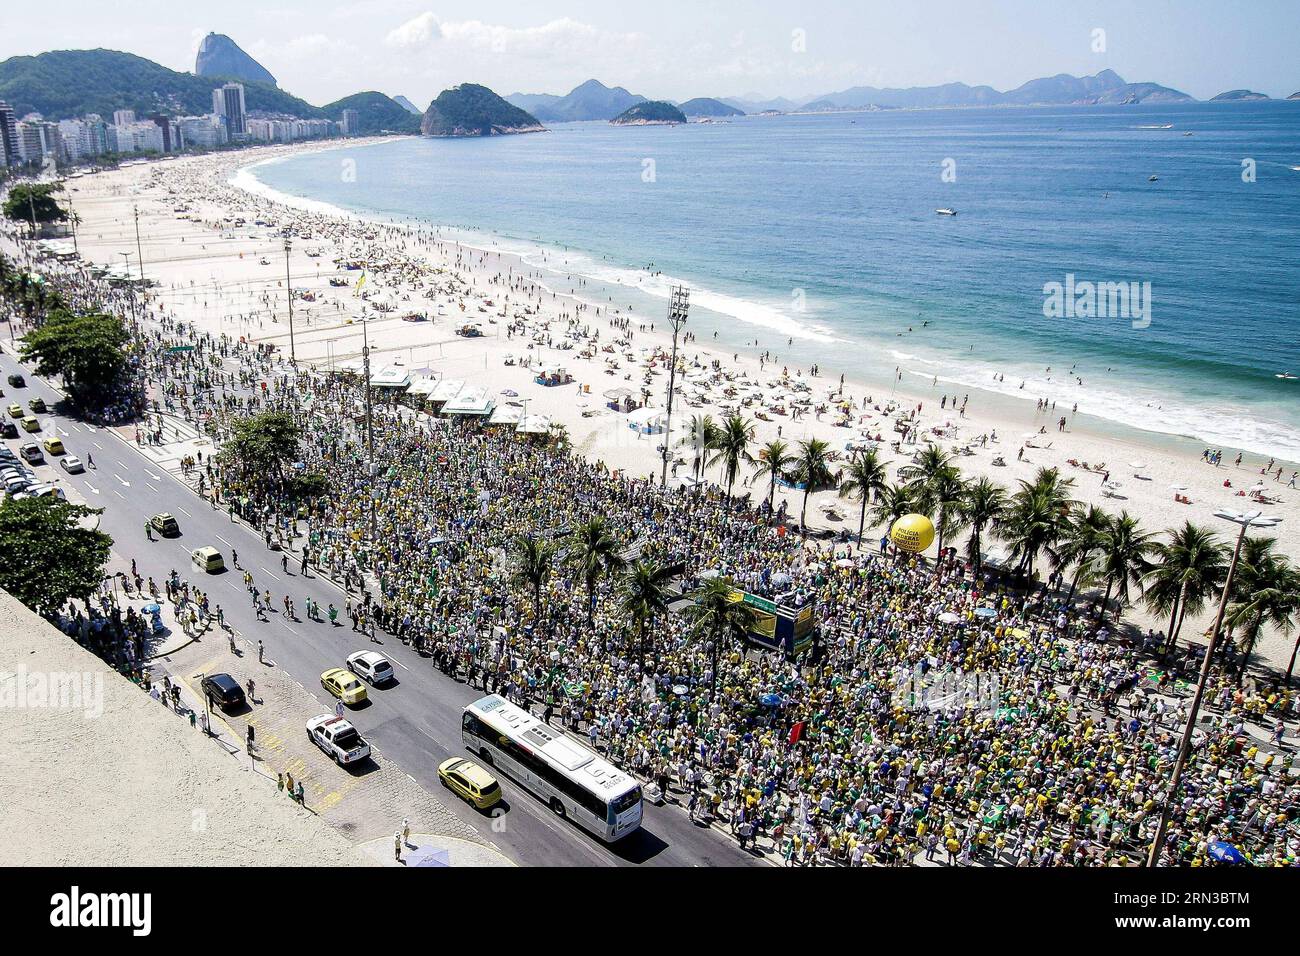 (150412) -- RIO DE JANEIRO, April 12, 2015 -- People gather during a demonstration against the government of Brazilian President Dilma Rousseff after allegations of corruption in the state oil company Petrobras in Rio de Janeiro, Brazil, on April 12, 2015. Rudy Trindade/AGENCIA ESTADO) (jp) BRAZIL OUT BRAZIL-SAO PAULO-SOCIETY-DEMOSTRATION e AE PUBLICATIONxNOTxINxCHN   Rio de Janeiro April 12 2015 Celebrities gather during a Demonstration against The Government of Brazilian President Dilma Rousseff After allegations of Corruption in The State Oil Company Petrobras in Rio de Janeiro Brazil ON Ap Stock Photo